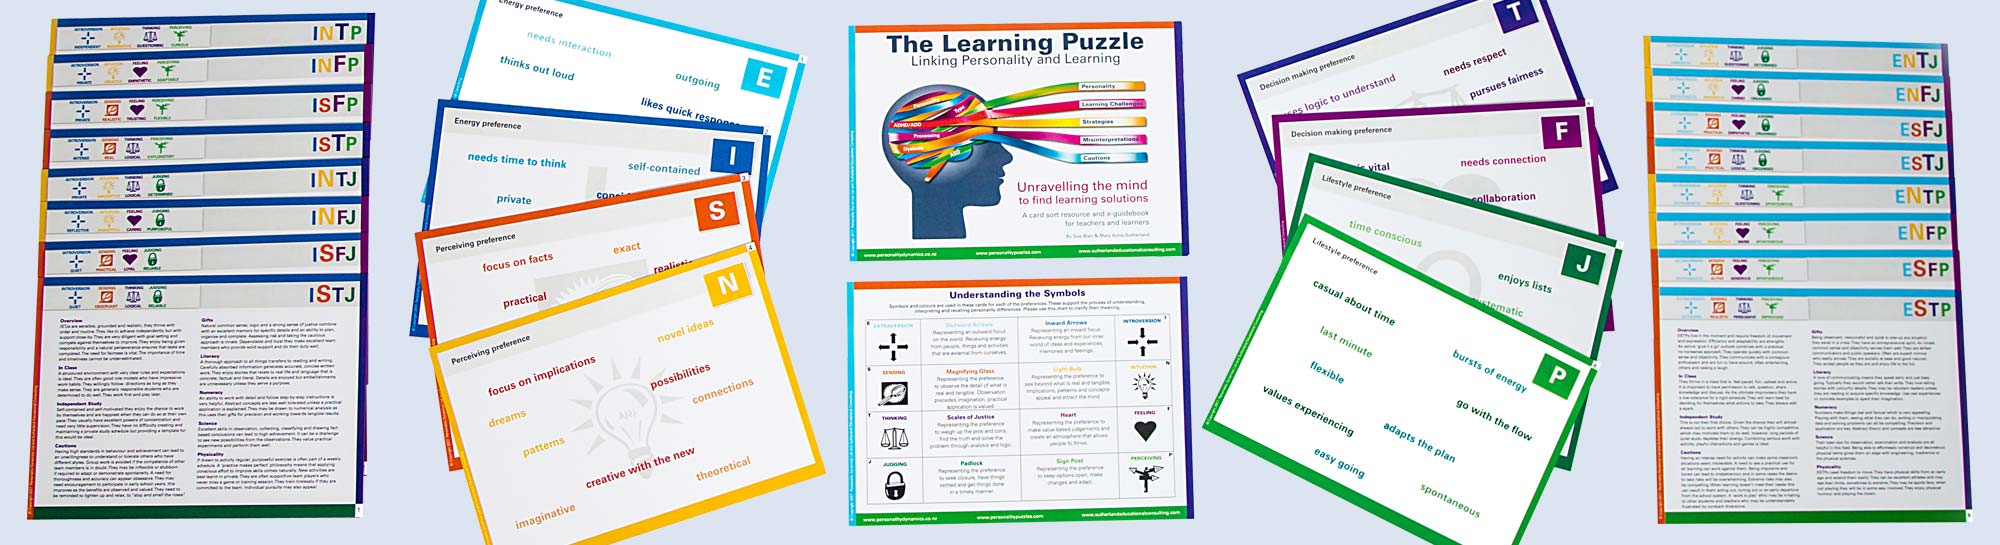 The Learning Puzzle